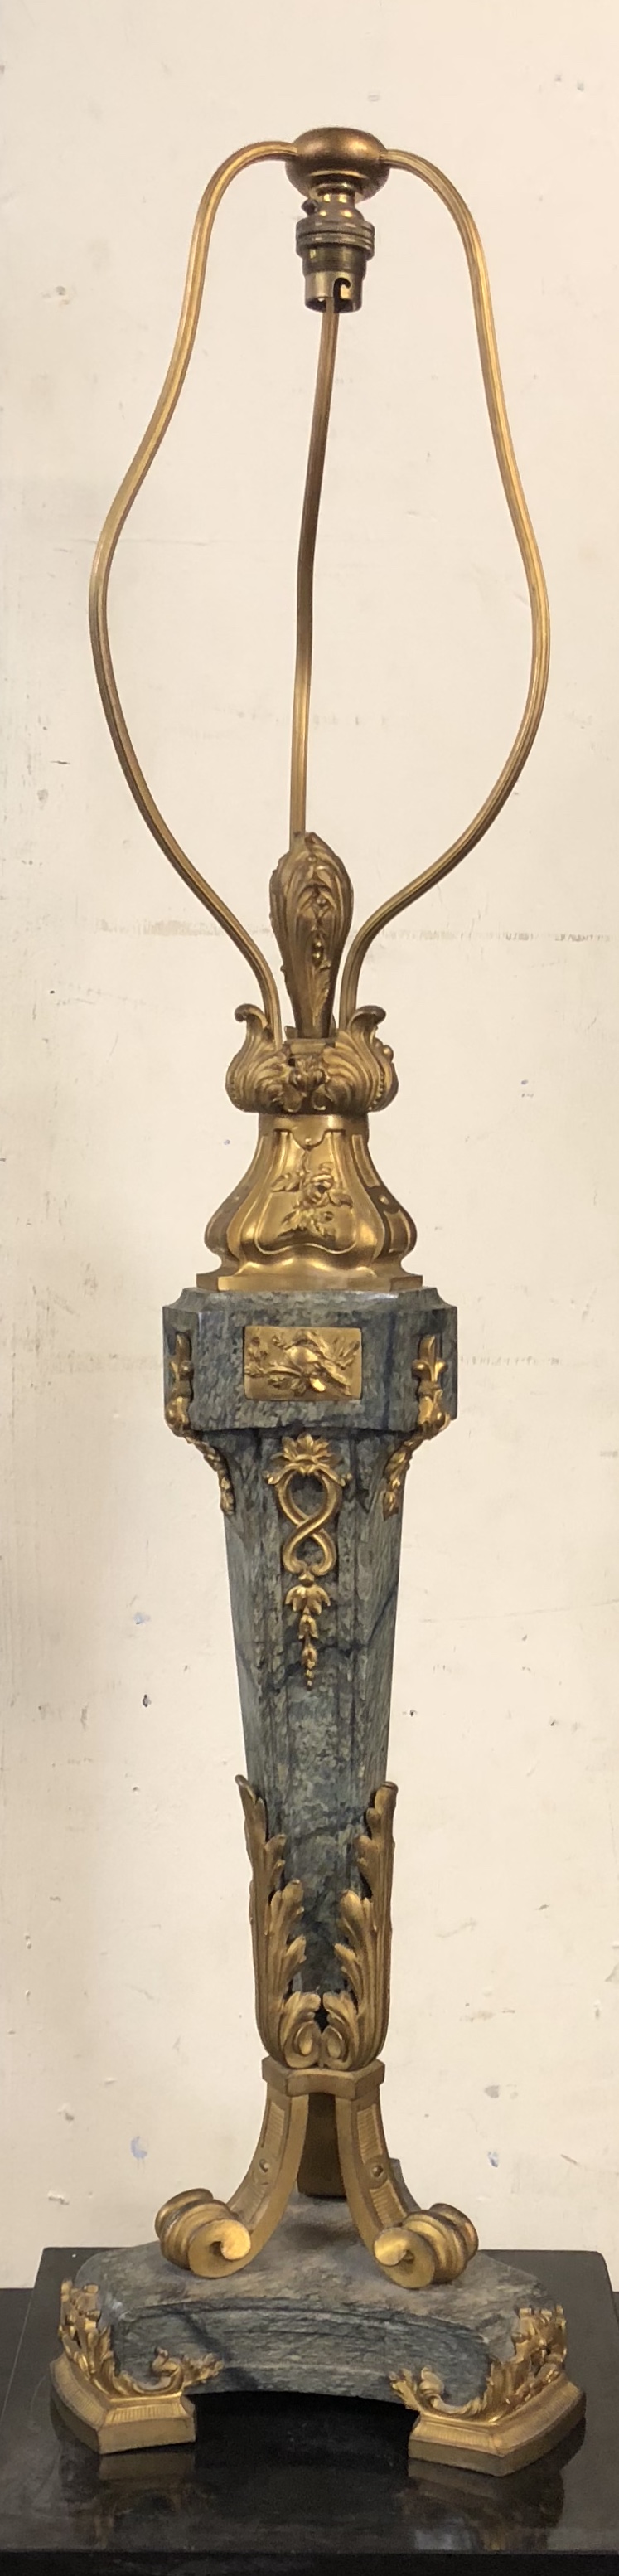 A LARGE A19TH CENTURY GREEN MARBLE AND GILT BRONZE TABLE LAMP Applied with plaques and foliage on